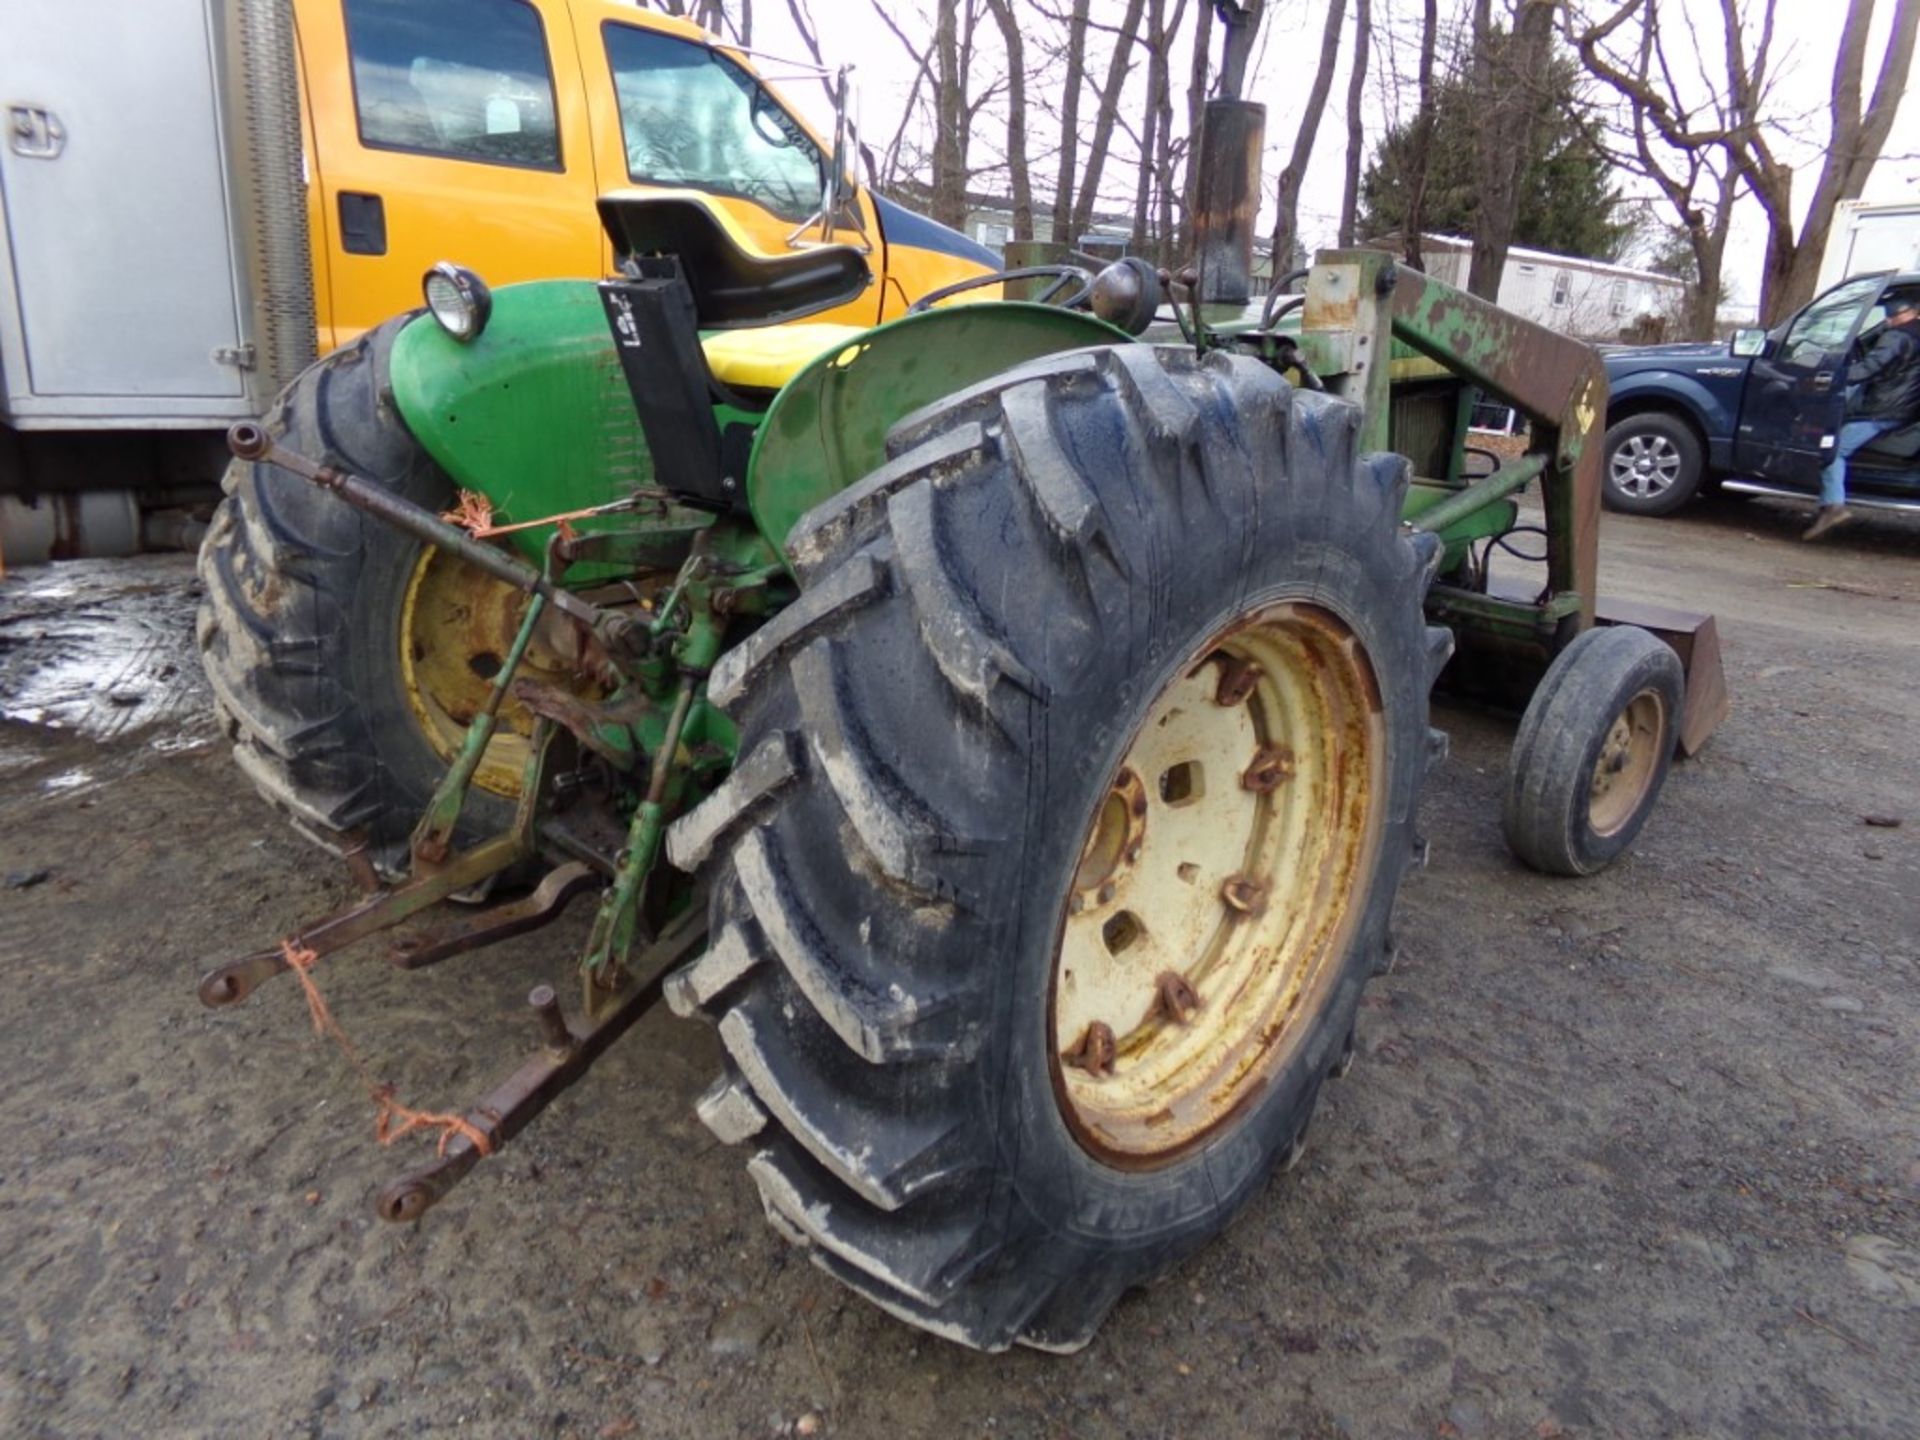 John Deere 2020 with Loader, Gas Engine, Model 48 Loader, PTO, 3pth, Single Remote In Rear, Mid Hyd. - Image 3 of 7